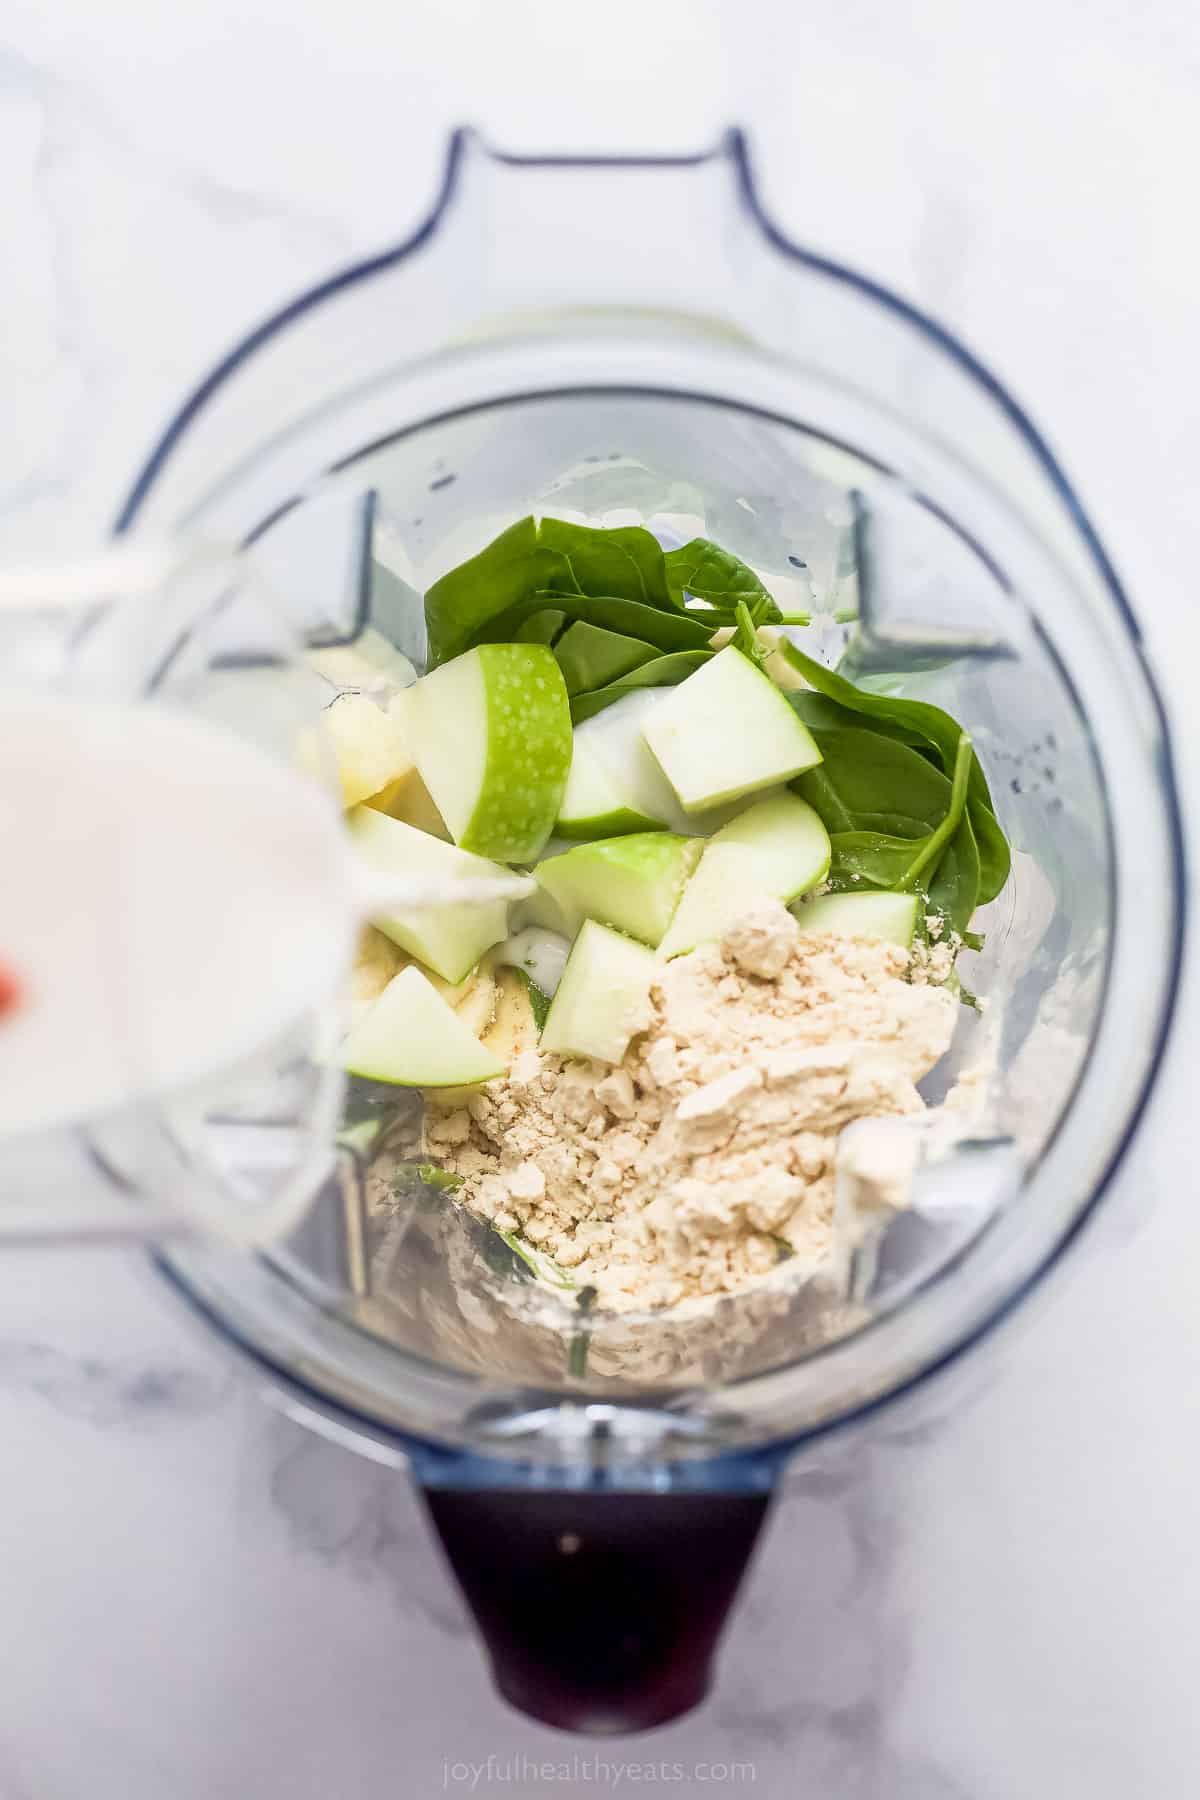 apples, spinach, and protein powder in a blender with milk being poured in